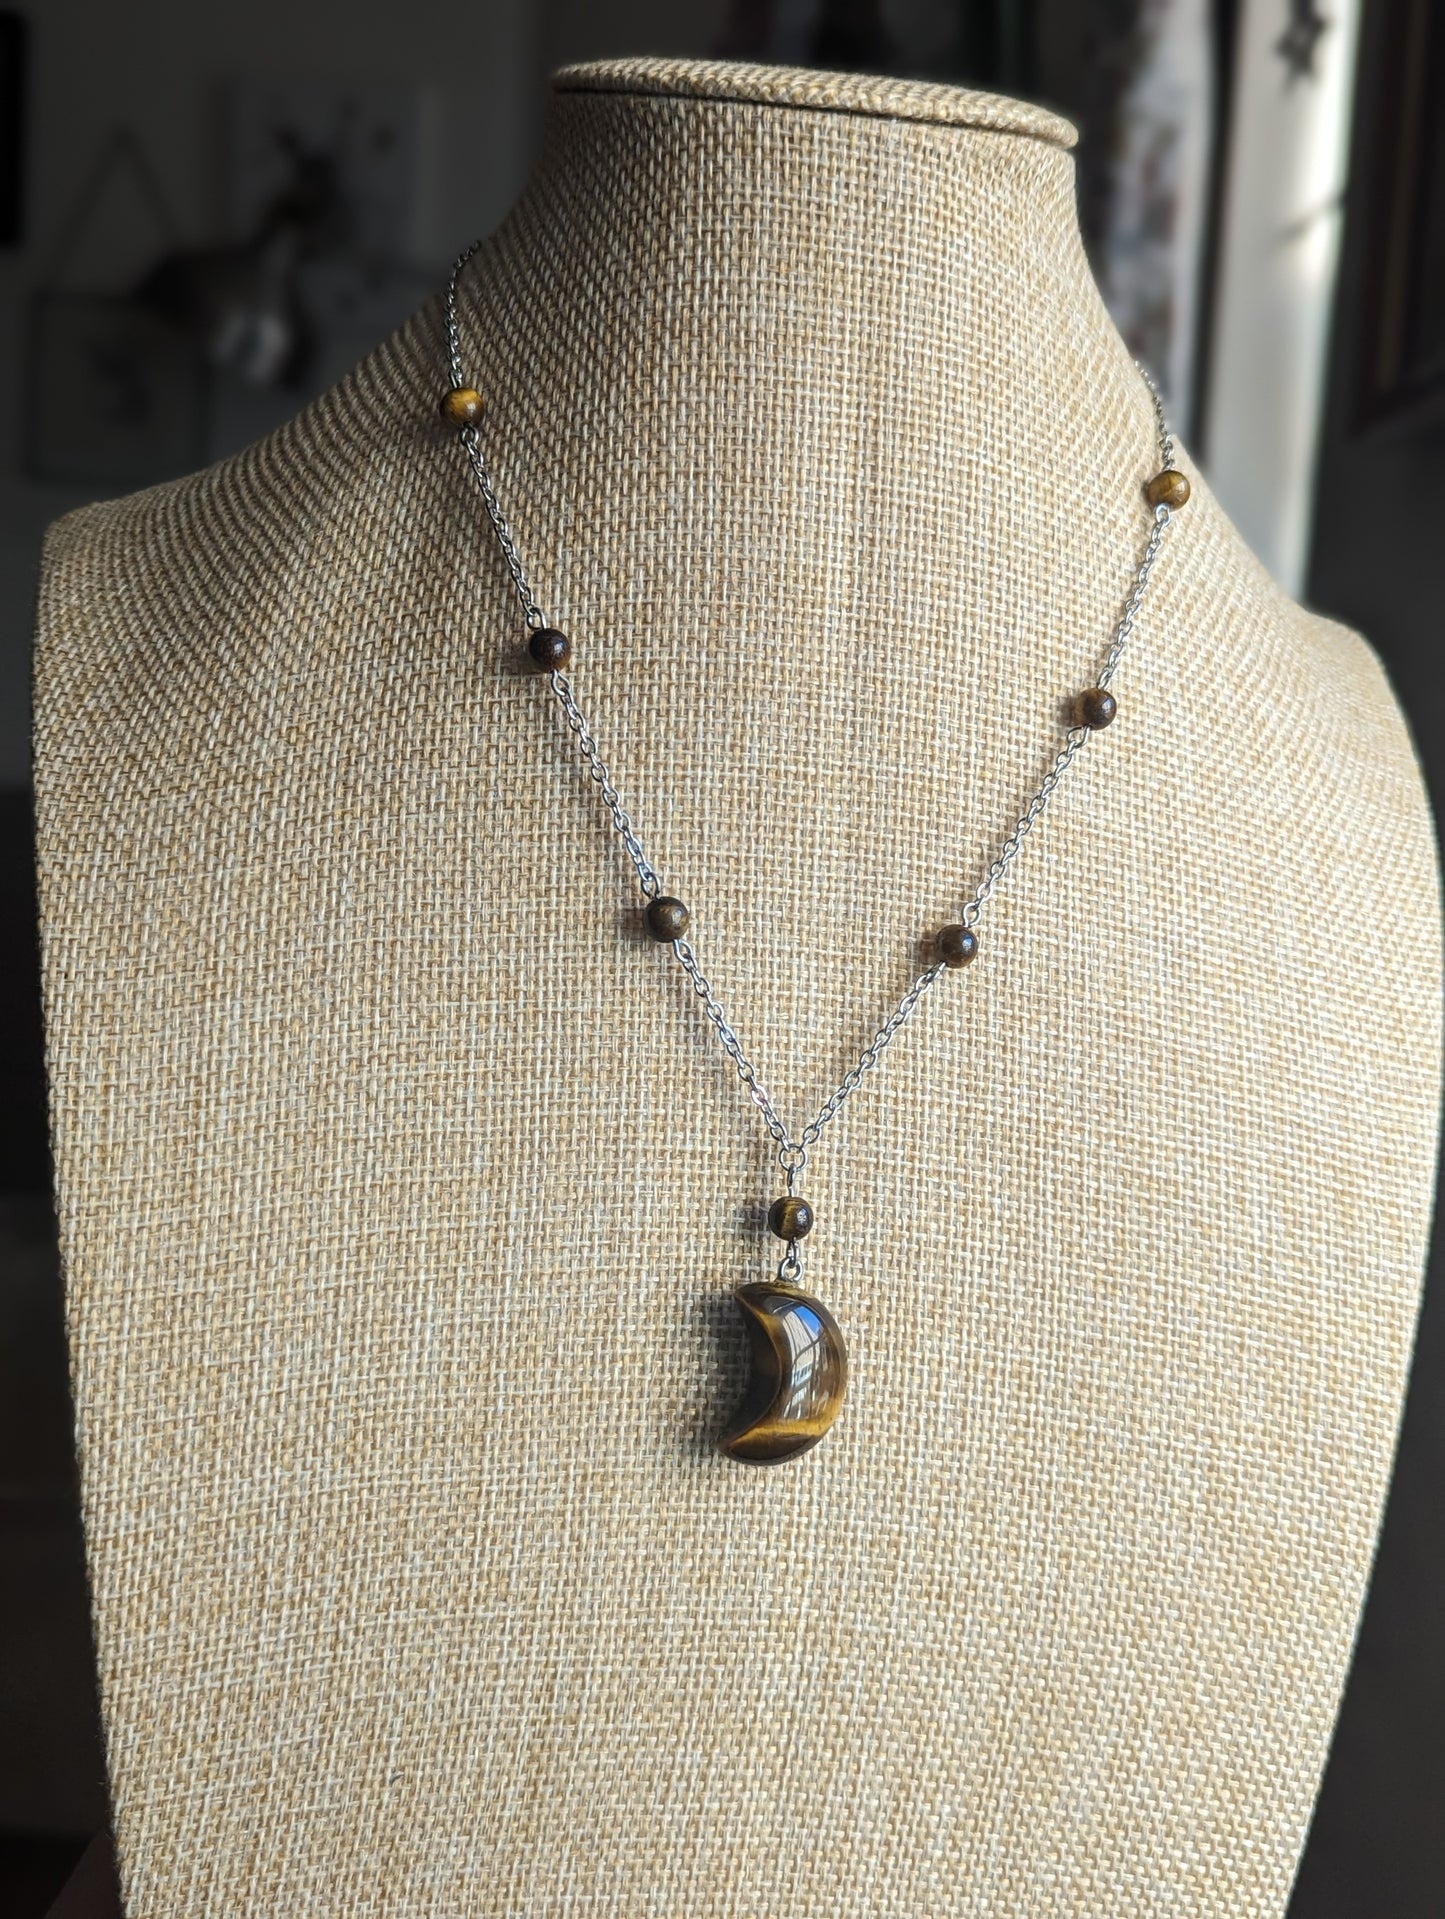 Tigers Eye Crescent Moon on Stainless Necklace